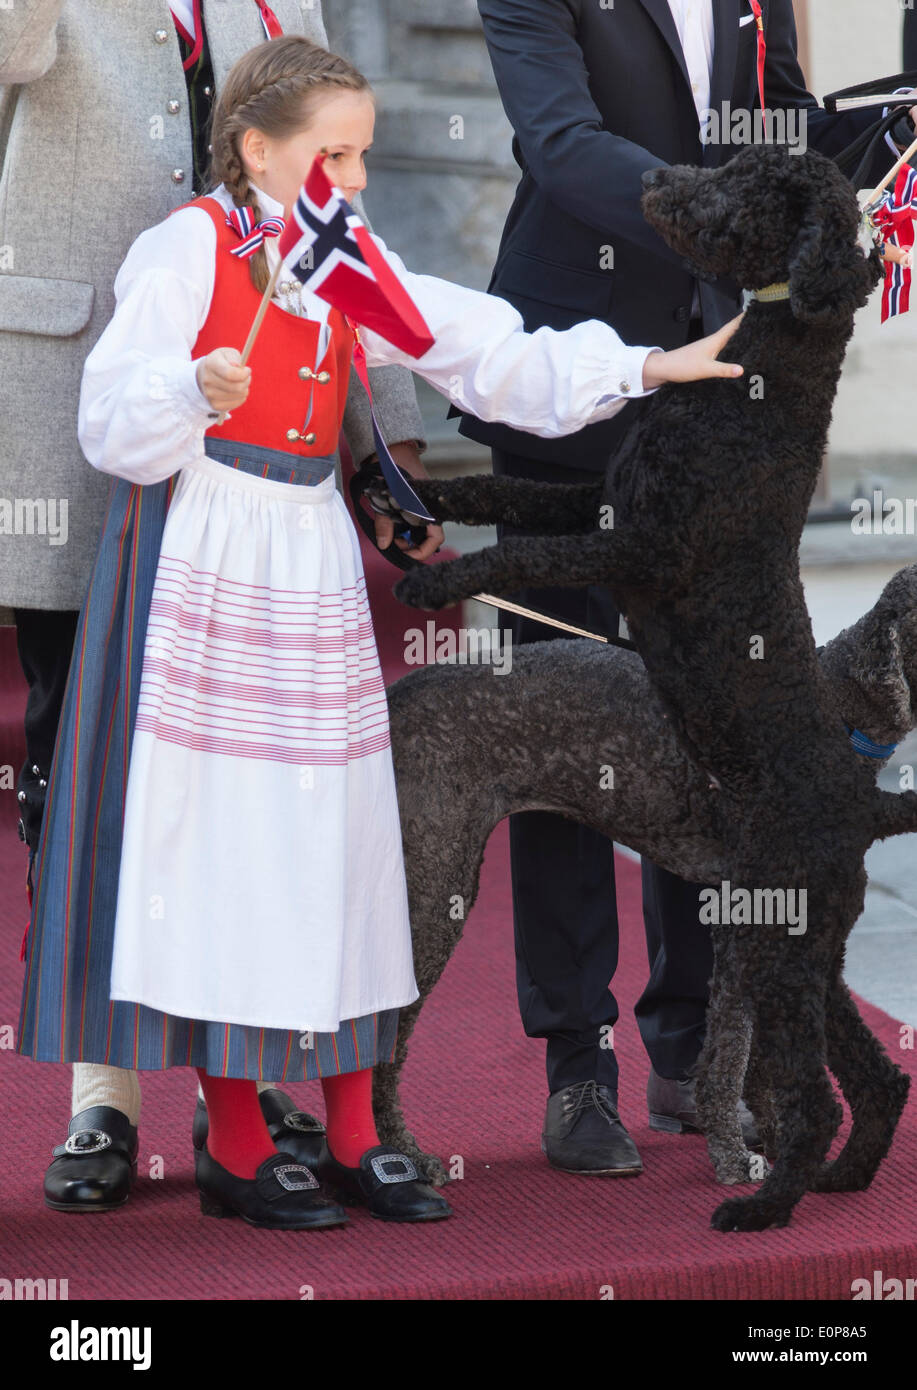 Oslo, Norway. 17th May, 2014. Princess Ingrid-Alexandra of Norway and dog Milly Kakao celebrates the national day at the residence in Skaugum and at the balcony of the royal palace in Oslo.  Credit:  Albert Nieboer /dpa /Alamy Live News Stock Photo